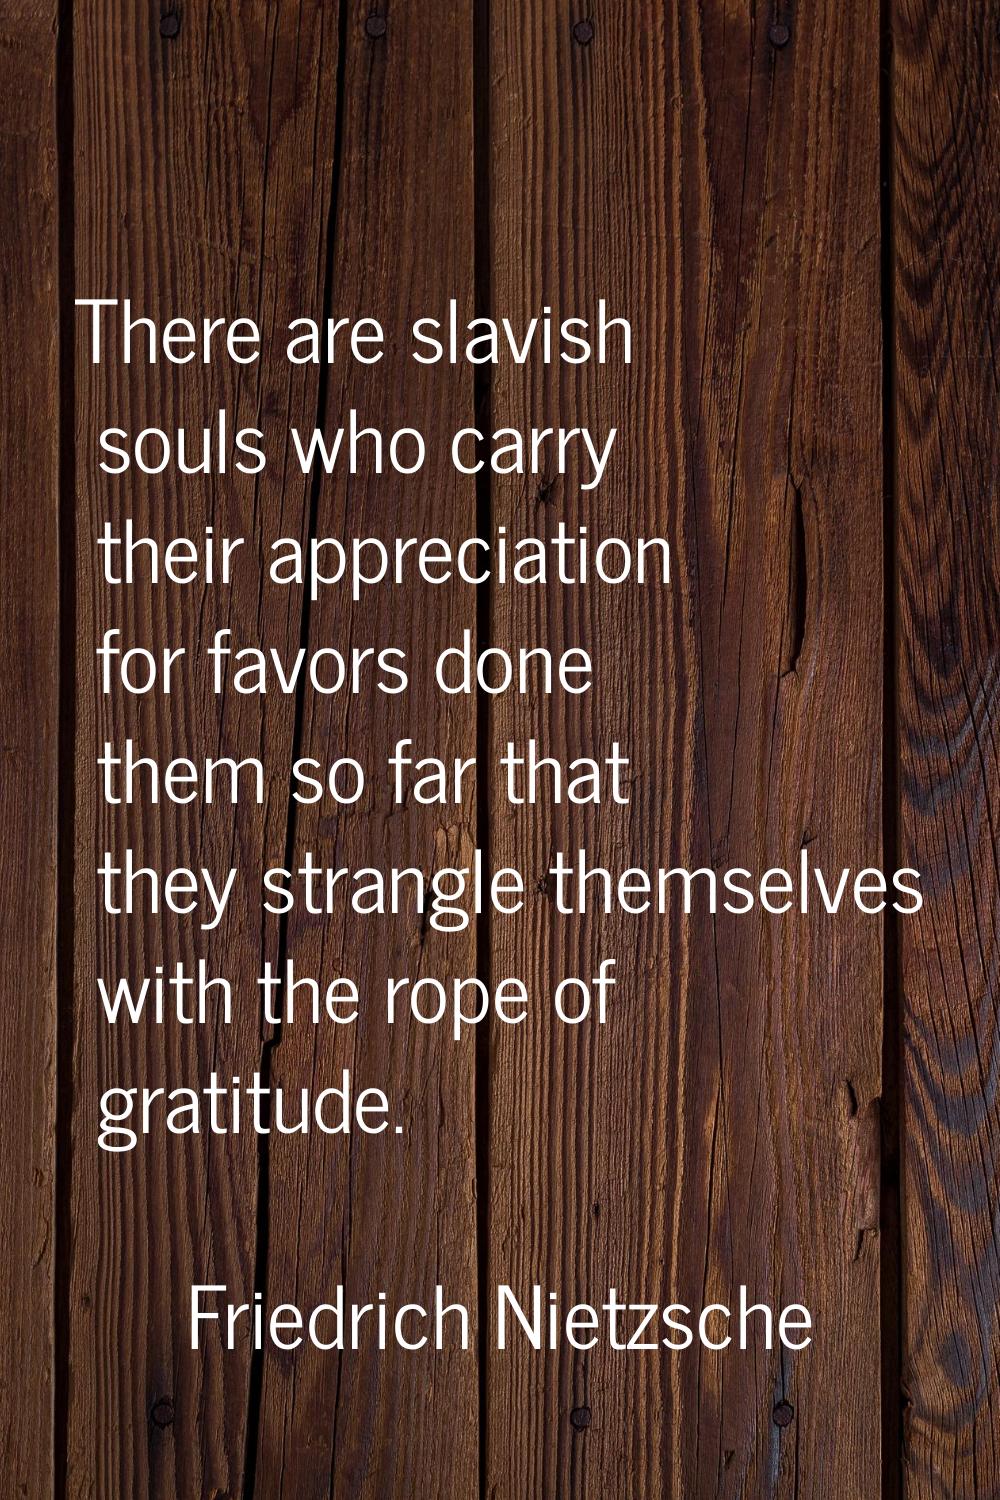 There are slavish souls who carry their appreciation for favors done them so far that they strangle